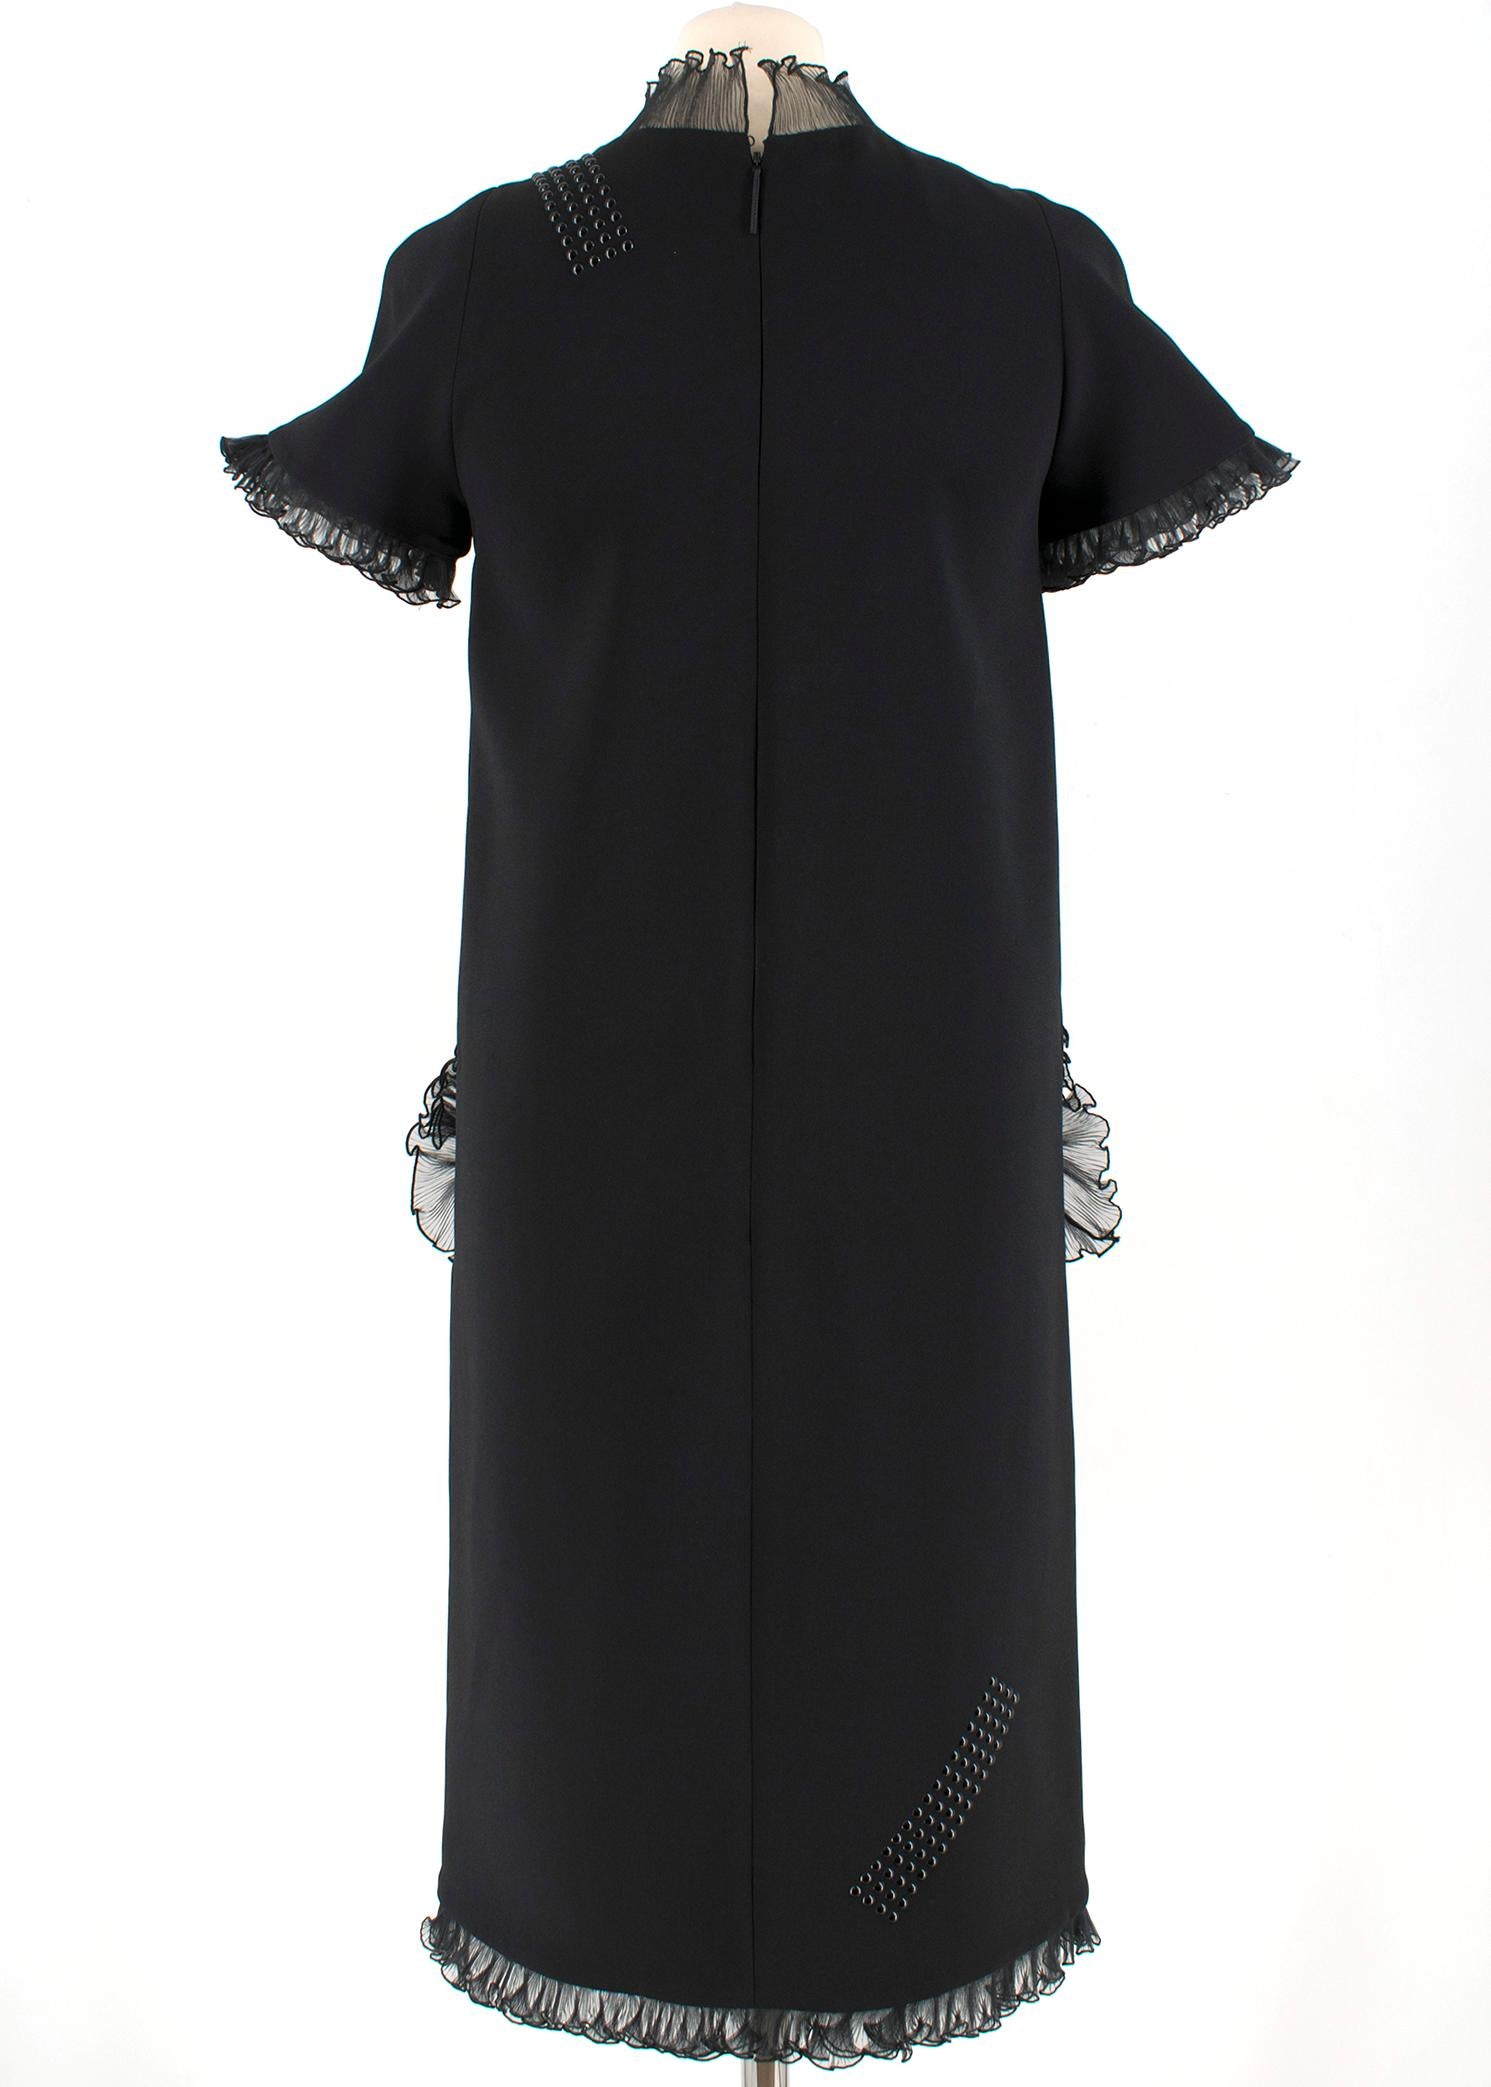 Christopher Kane Black Organza Frill High Neck Dress - Size US 2 In New Condition For Sale In London, GB